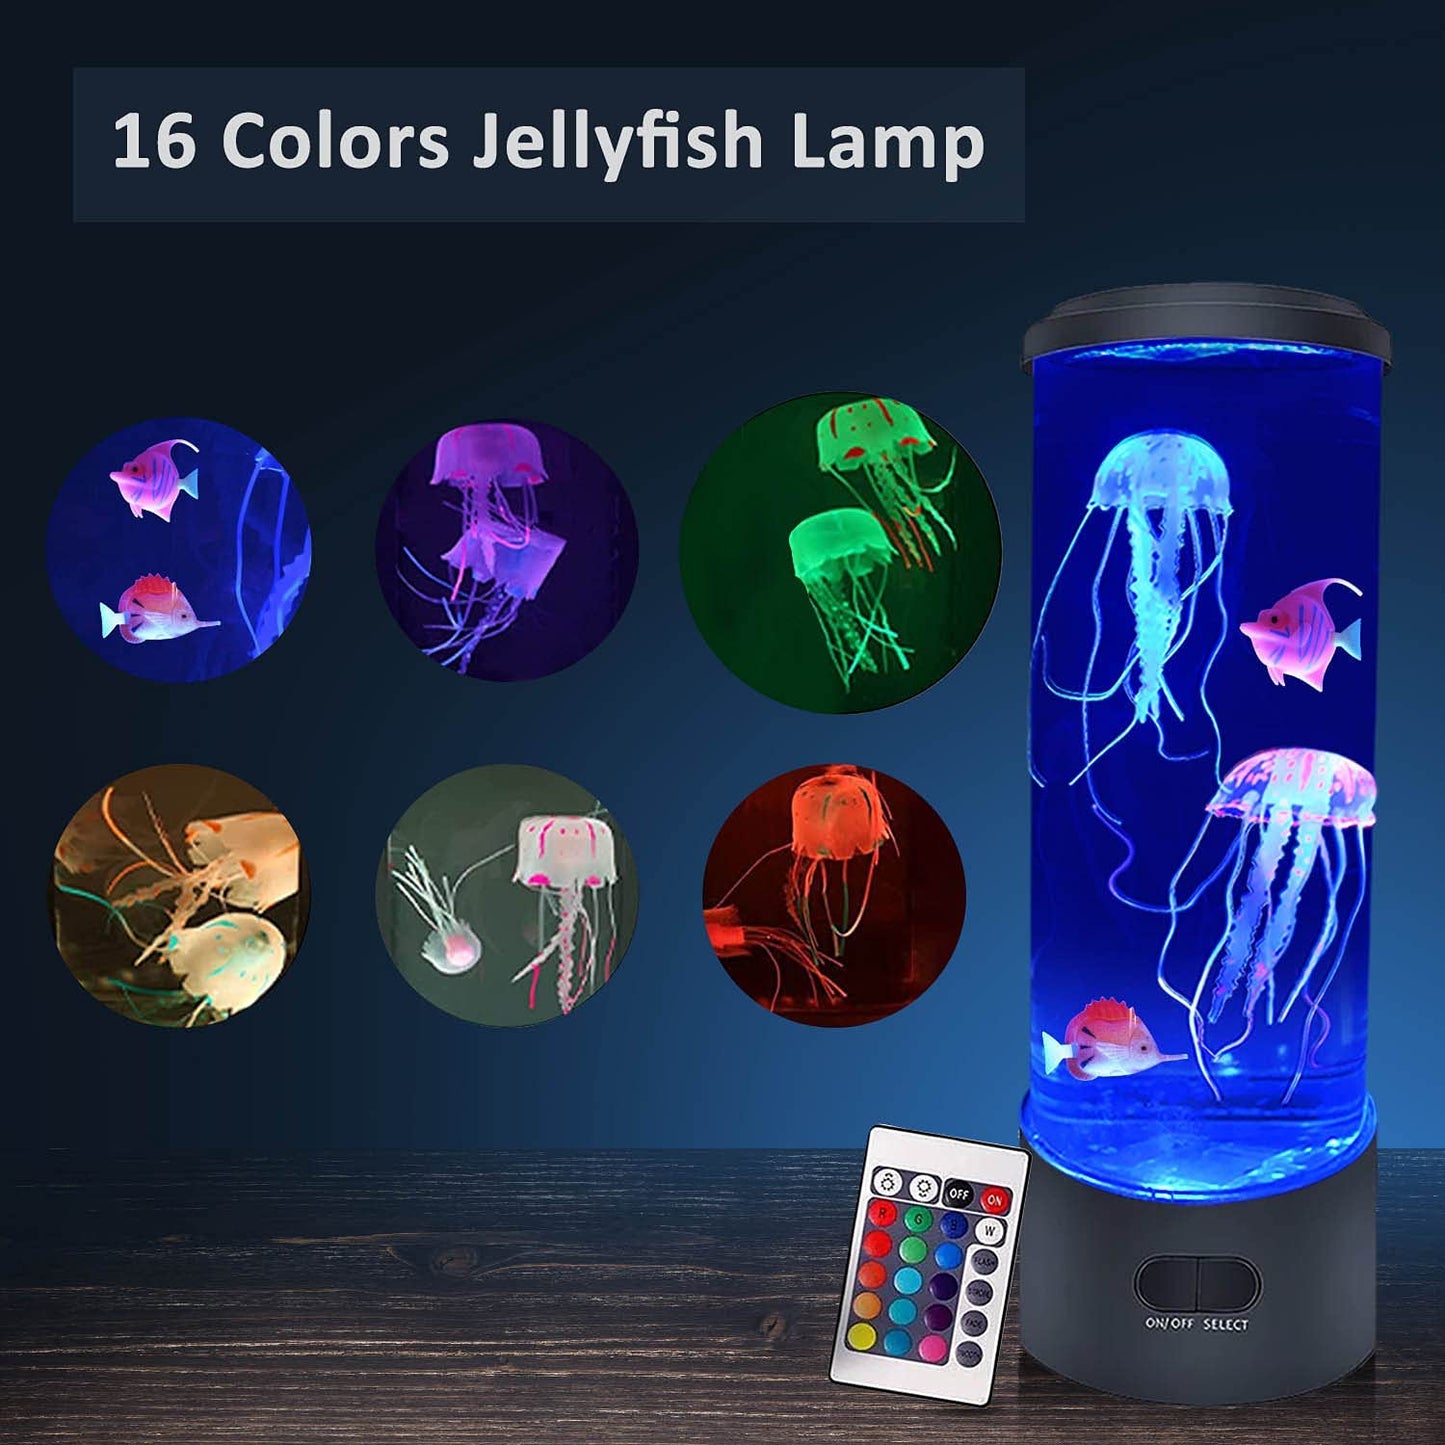 "Magical Jellyfish Lava Lamp - Mesmerizing Color Changing Lights to Illuminate Your Space, Enchanting Table Aquarium Night Light for Home Office Decor (Light Blue)"